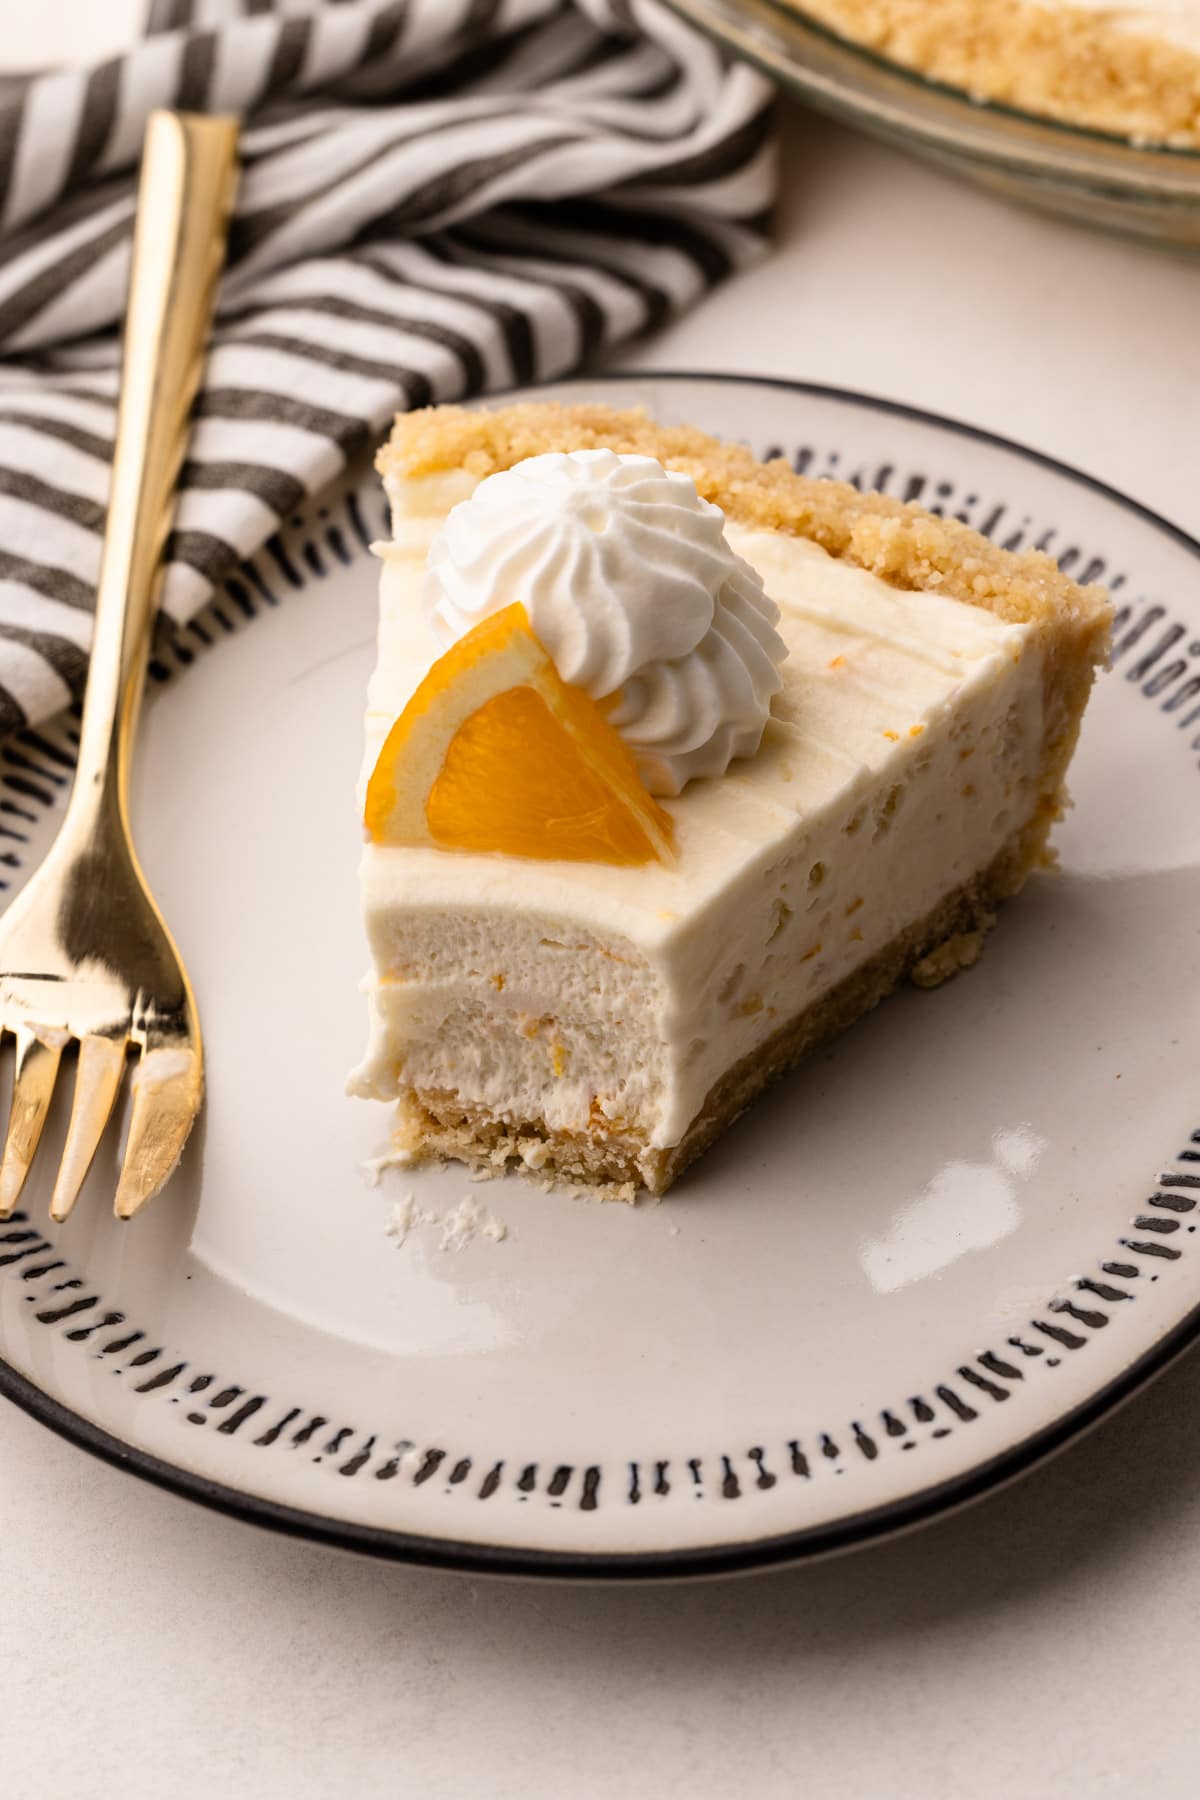 A slice of creamsicle pie.